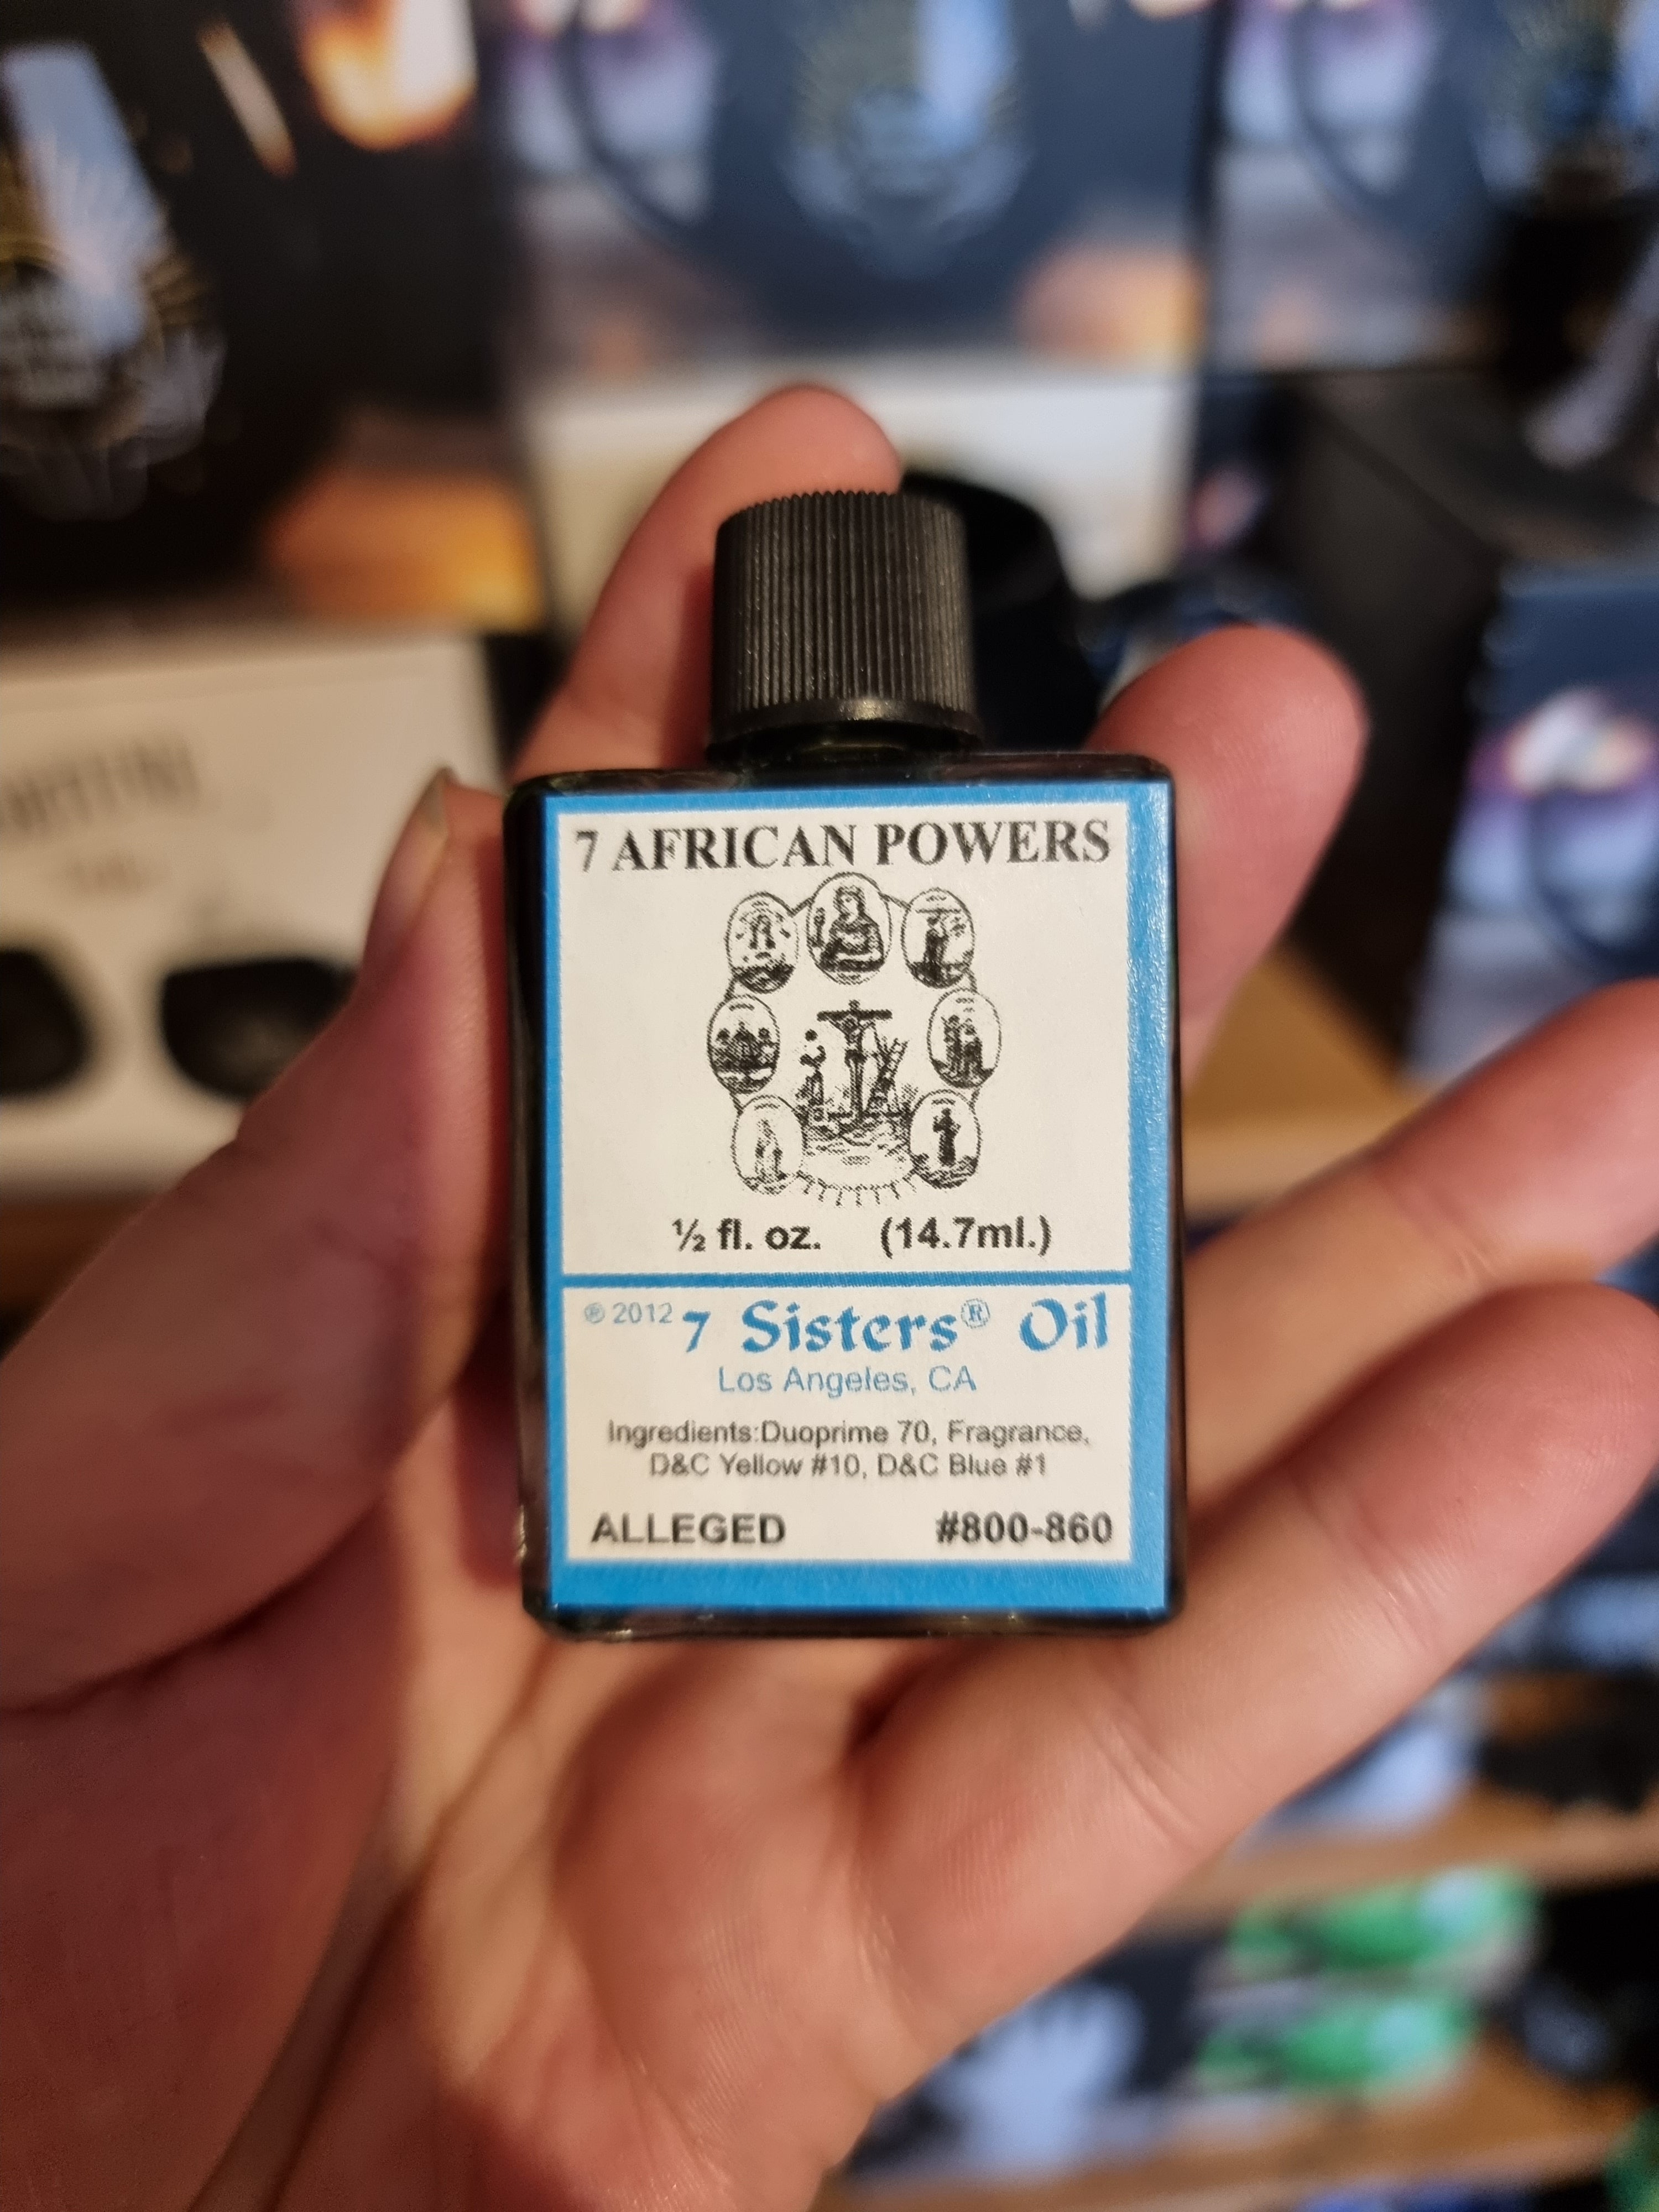 7 African Powers Oil